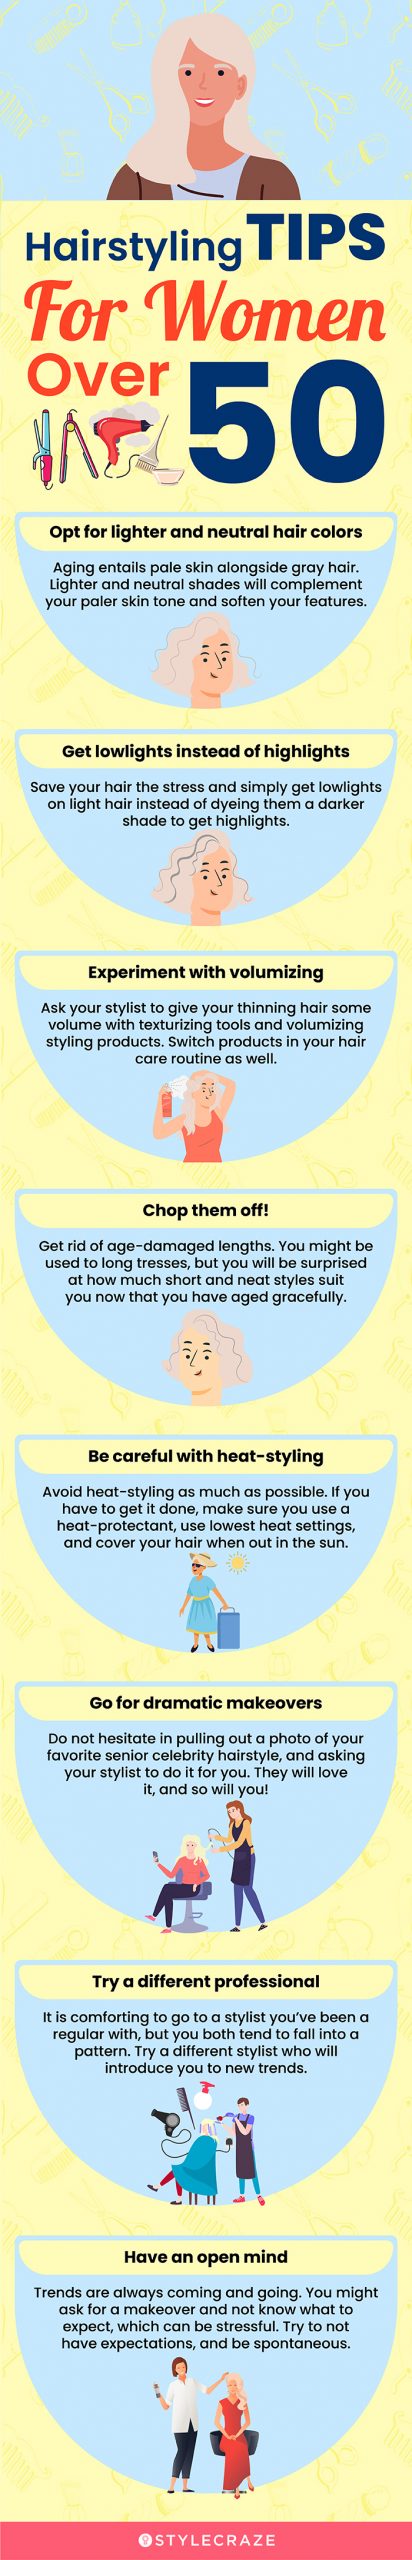 hairstyling tips for women over 50 (infographic)